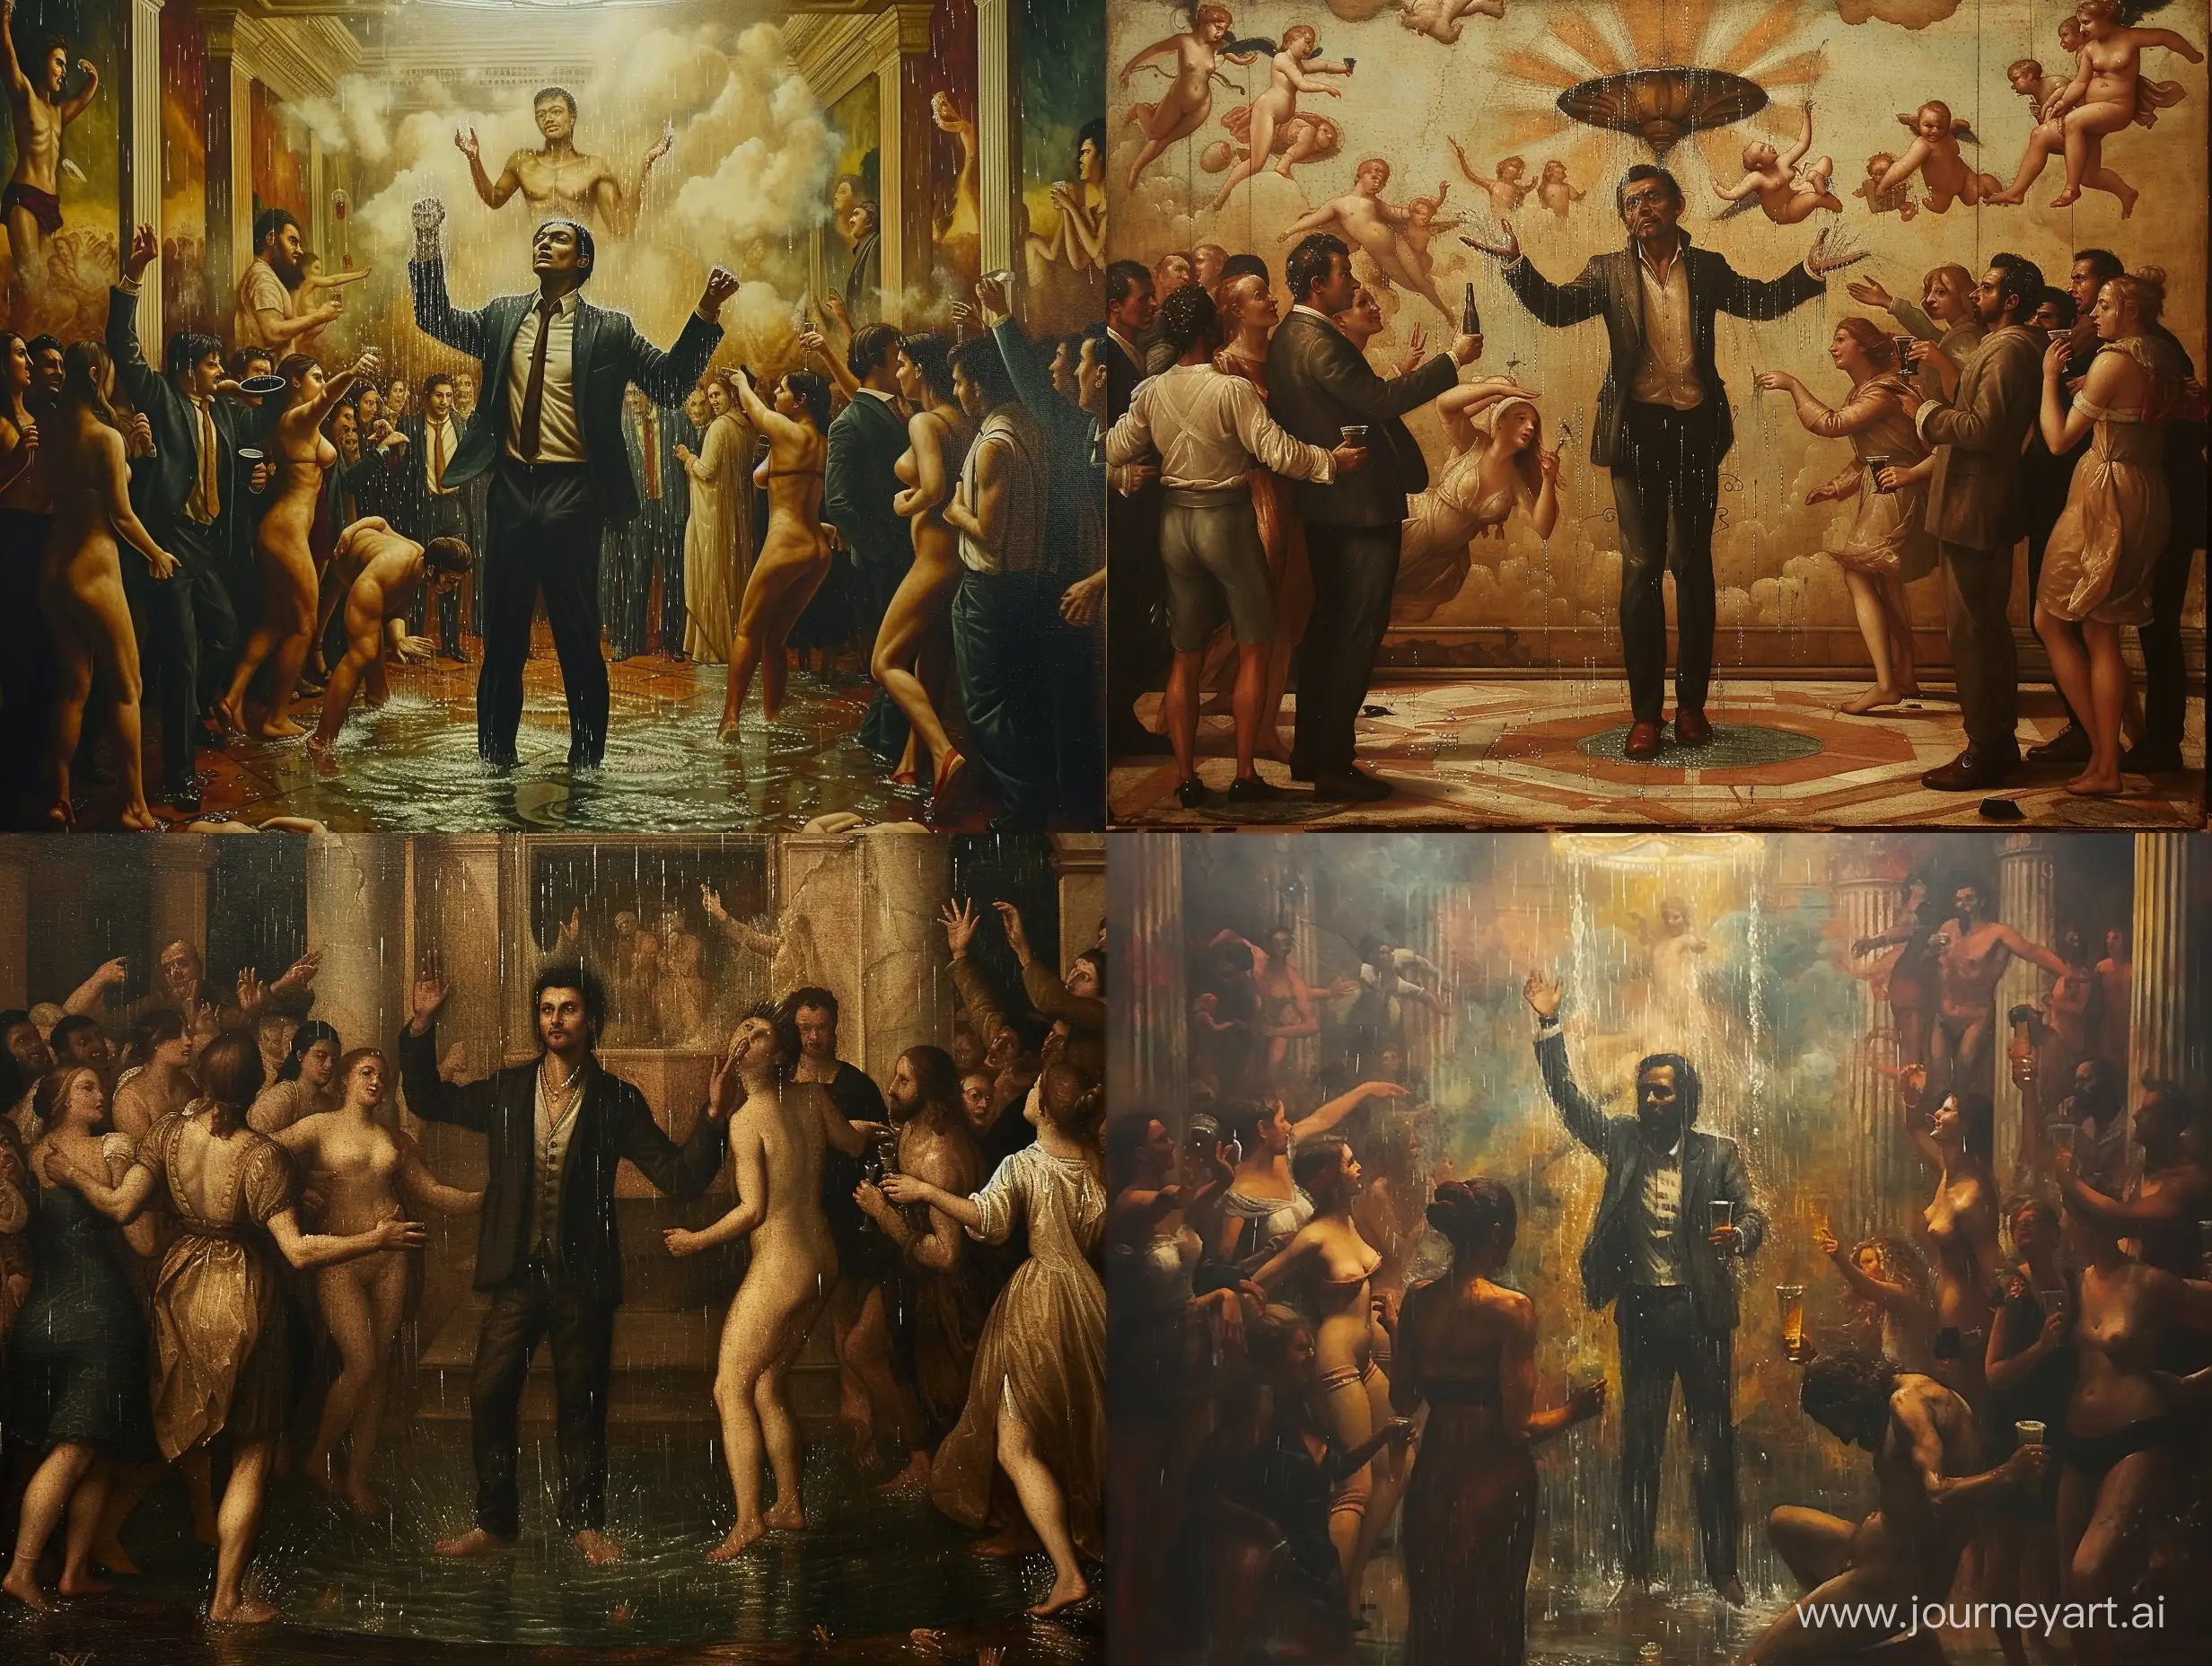 High Renaissance painting, with the man that makes rain standing in the middle, dressed in business suit and people partying around him, michelangelo artstyle, highly detailed